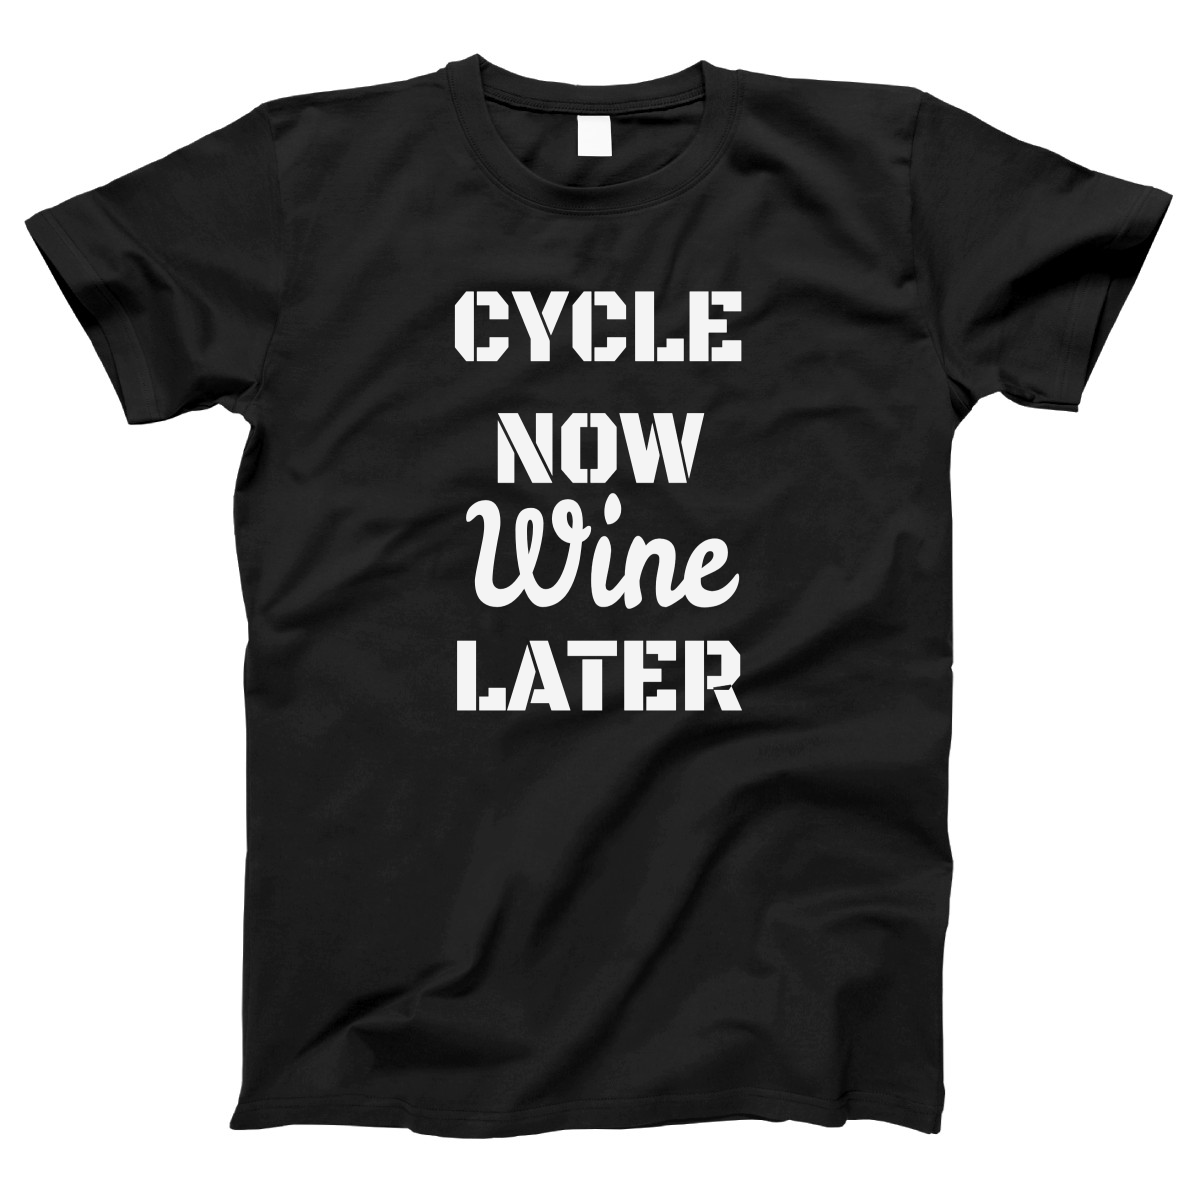 Cycle Now Wine Later Women's T-shirt | Black